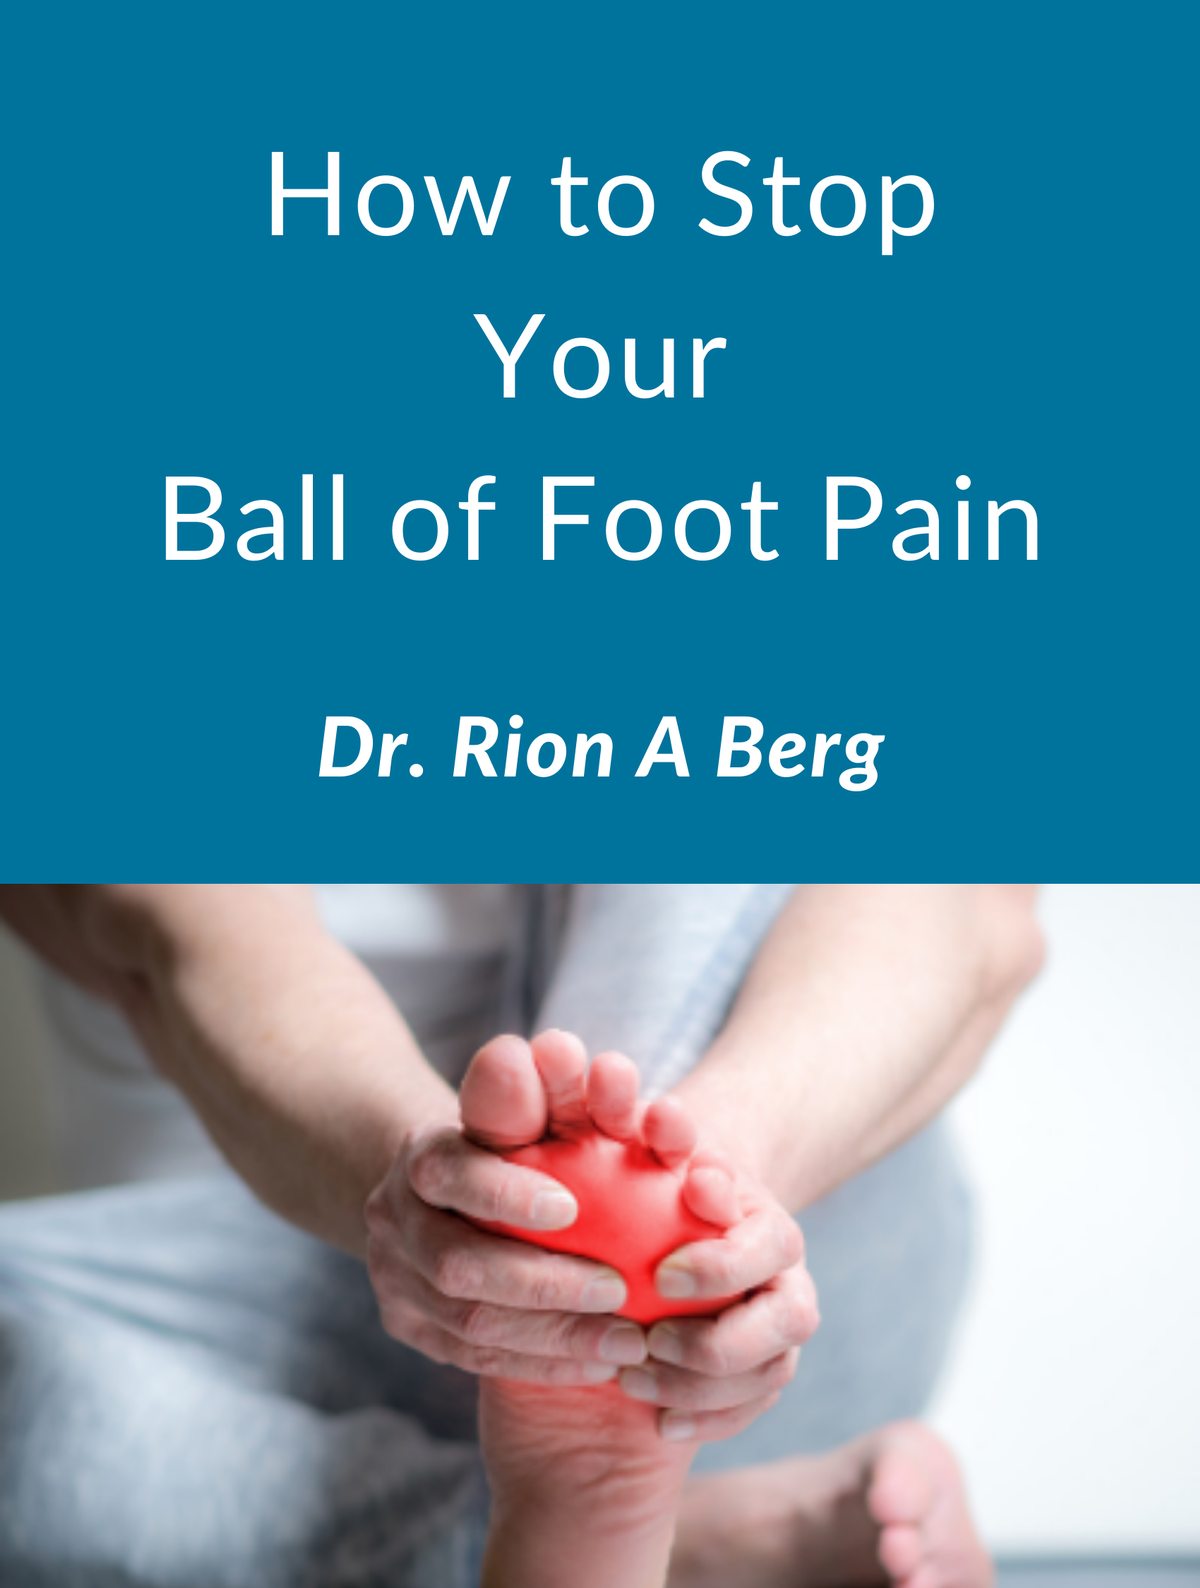 How To Stop Your Ball of Foot Pain